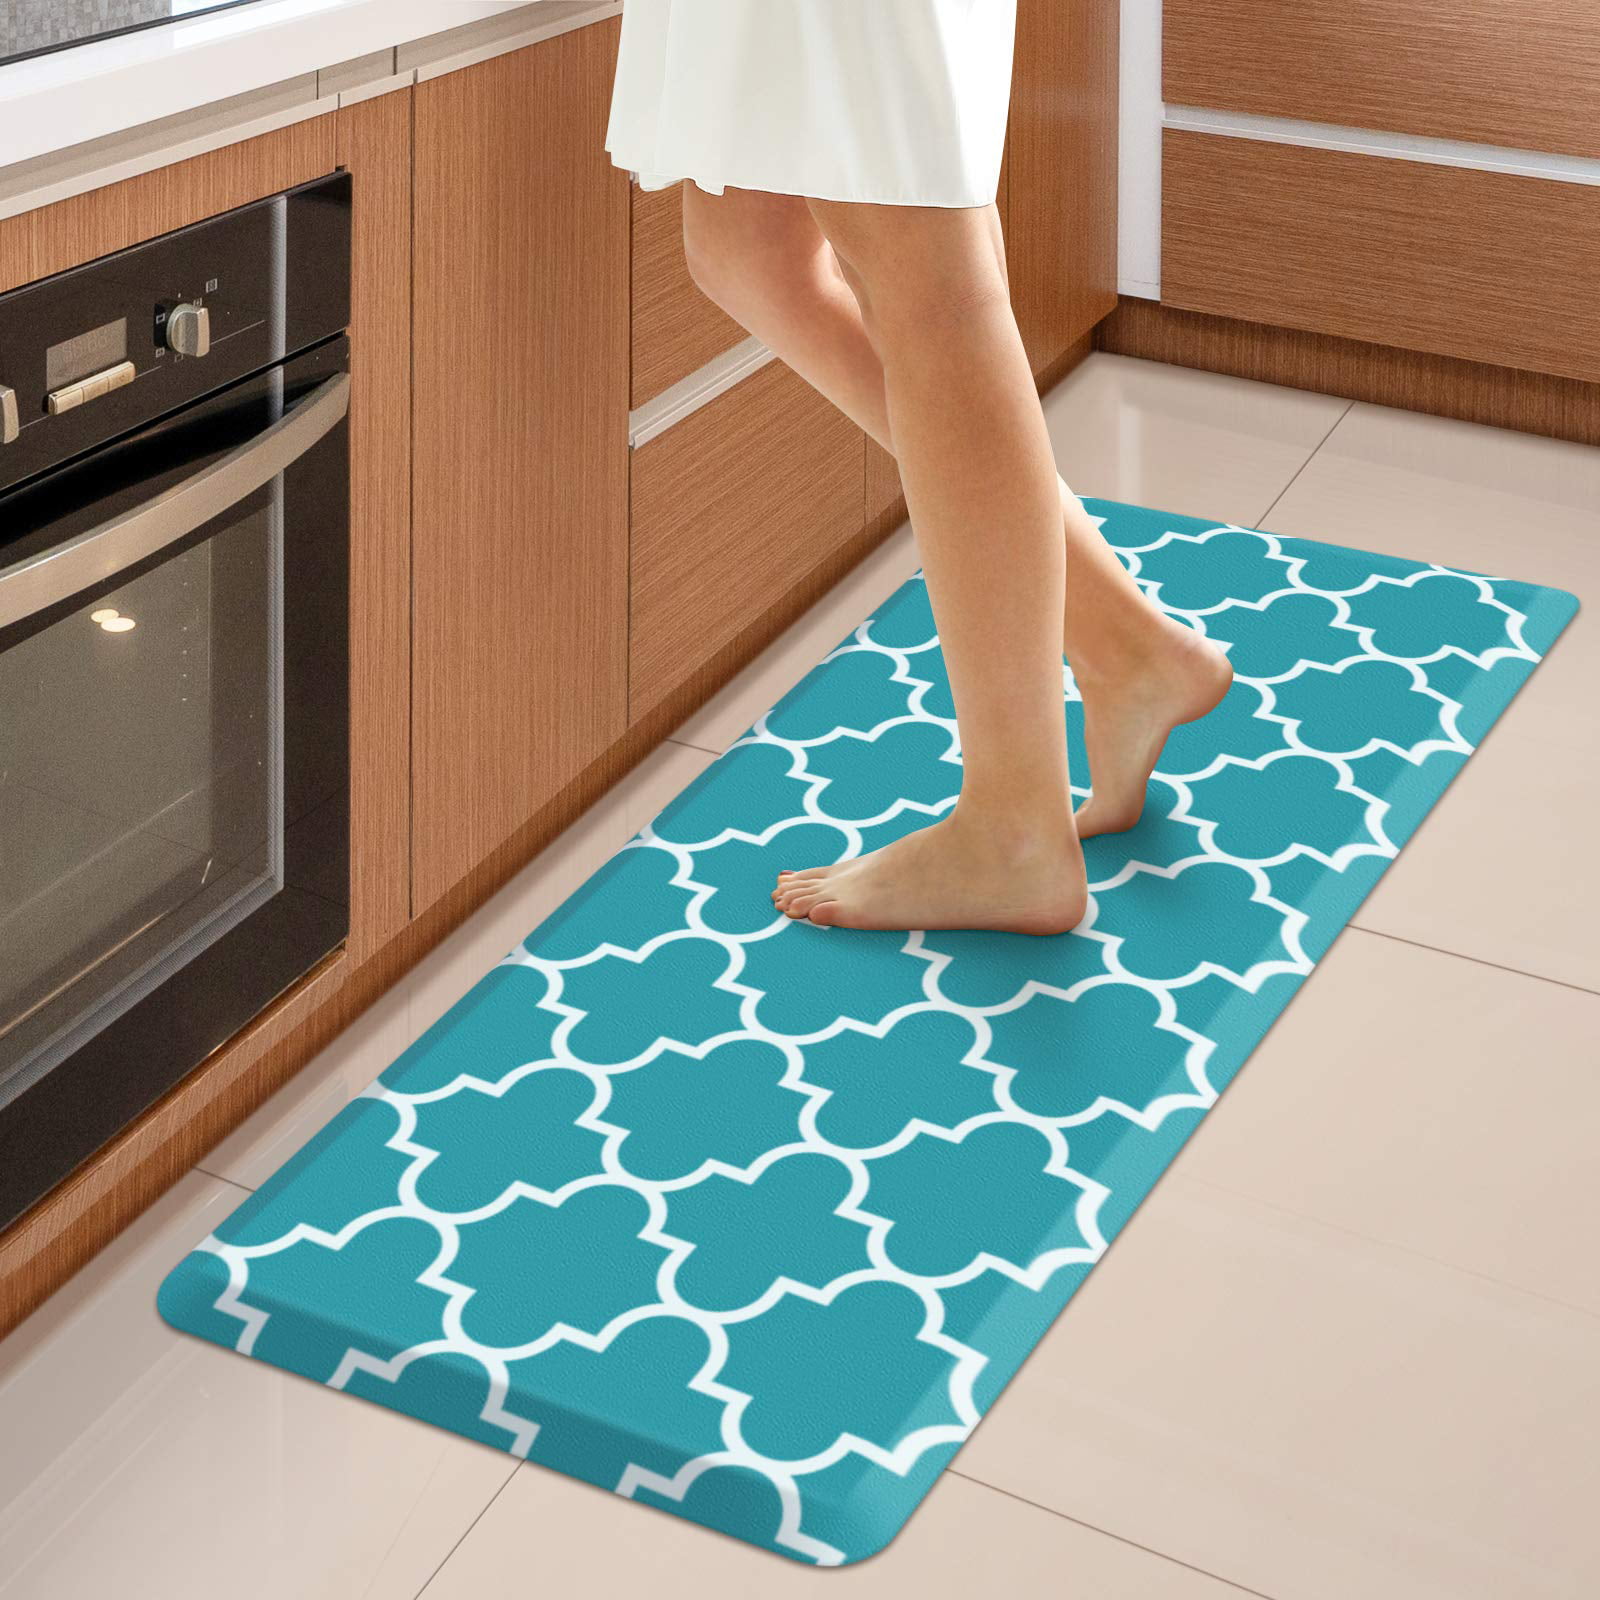 Lanmok Kitchen Mat Cushioned Anti-Fatigue Kitchen Rug,Non-Slip Kitchen Mats and Rugs Heavy Duty Comfort Rug for Kitchen, Floor Home, Office, Size: 40